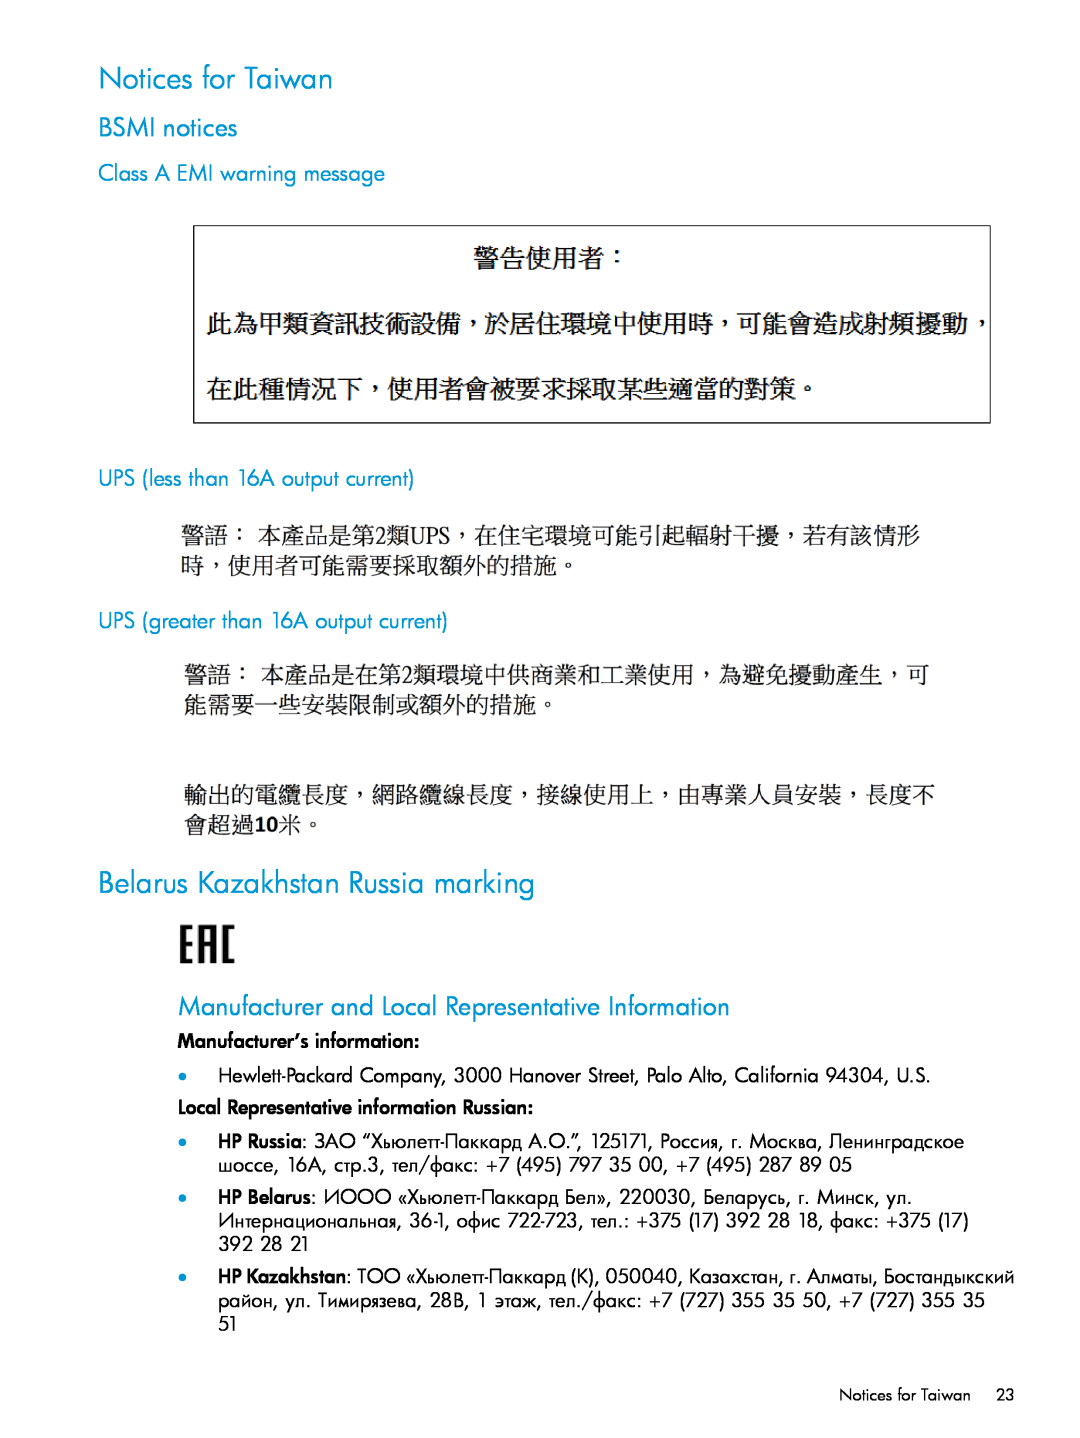 HP Networking Safety and Compliance manual Notices for Taiwan, Belarus Kazakhstan Russia marking, BSMI notices 